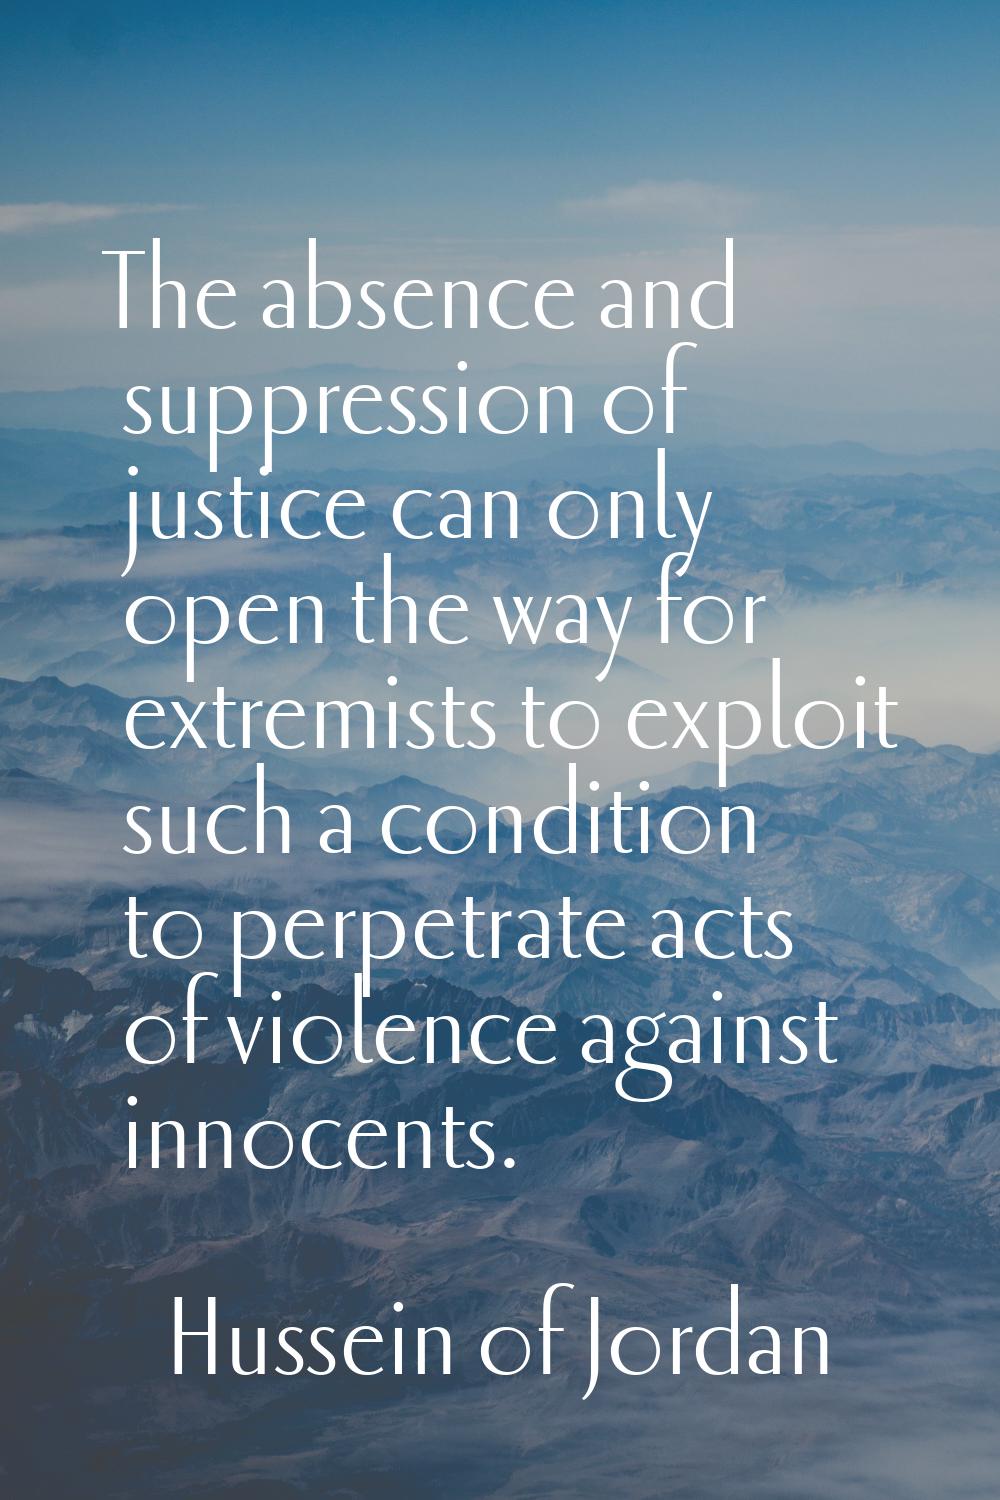 The absence and suppression of justice can only open the way for extremists to exploit such a condi